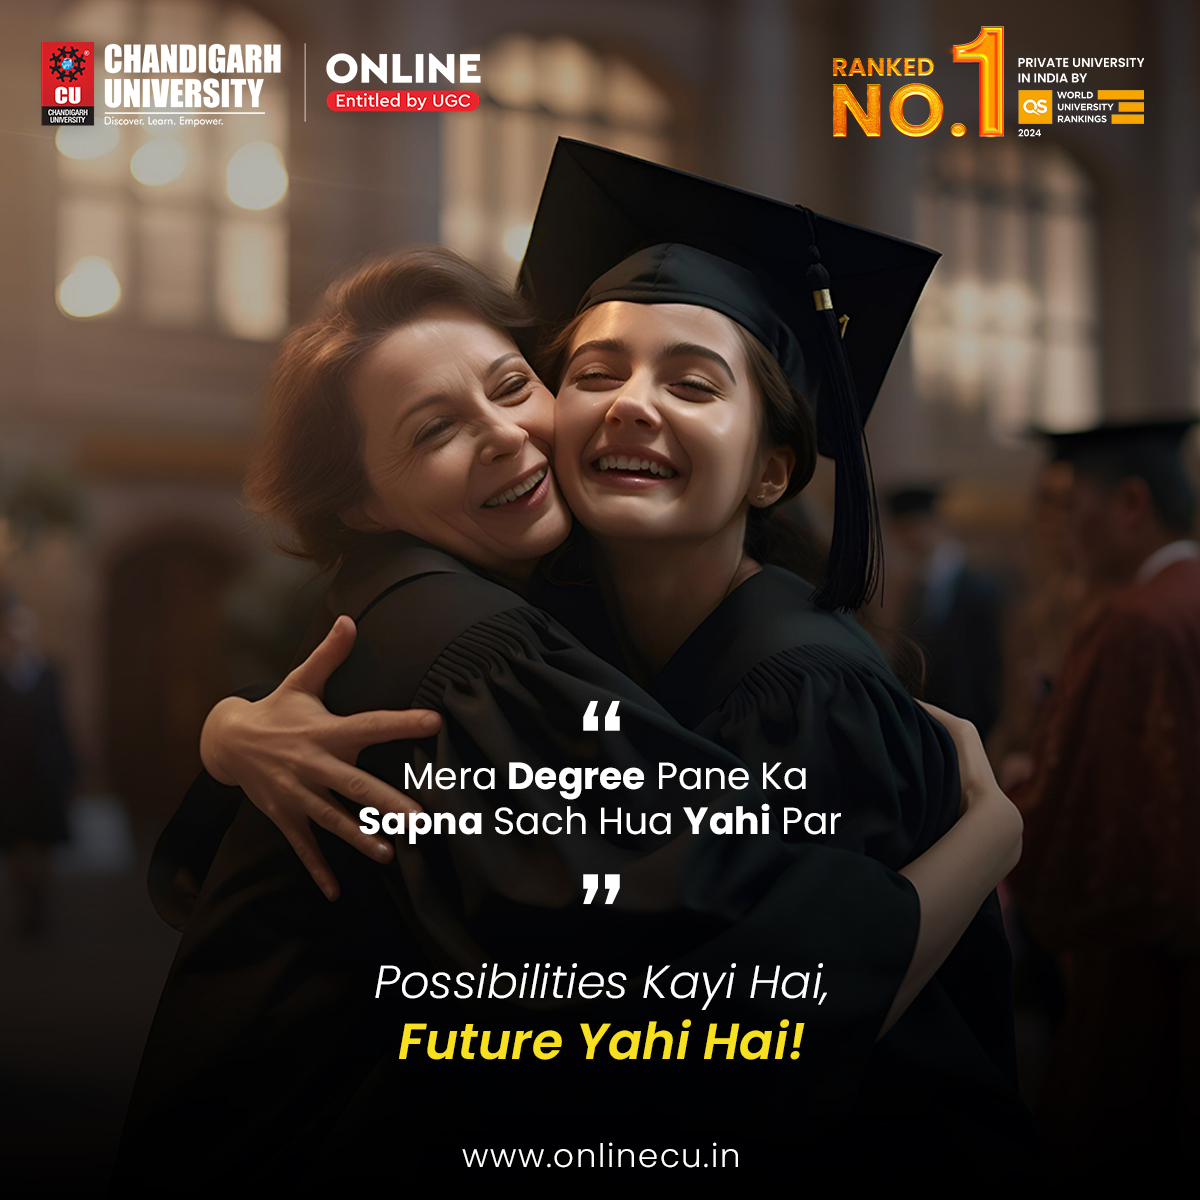 Feel free to embrace the future of education with our flexible and quality online programs. Visit onlinecu.in to join us and make your educational dreams a reality!

#ChandigarhUniversityOnline #CUOnline #OnlineCU @OnlineLearning #OnlineDegree #OnlineDegreePrograms